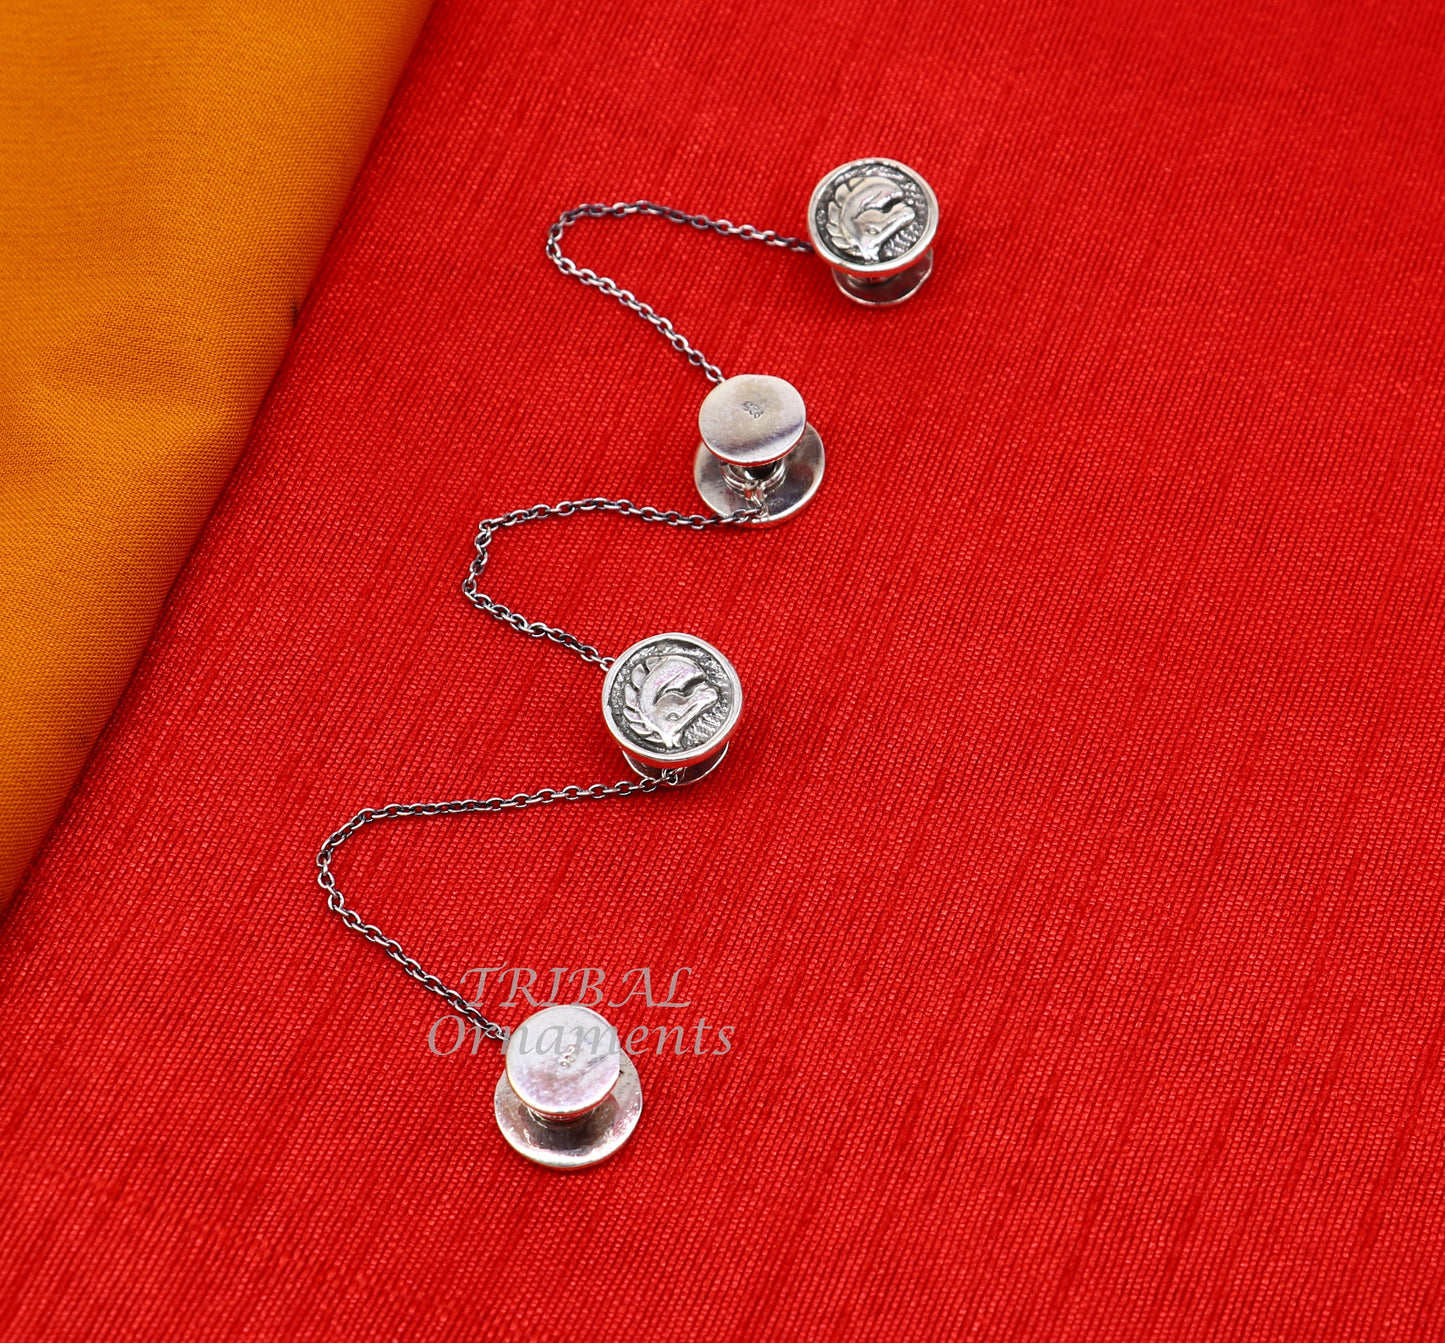 925 Sterling silver handmade amazing unicorn horse design buttons or cufflinks for men's kurta, best gifting jewelry occasions btn08 - TRIBAL ORNAMENTS